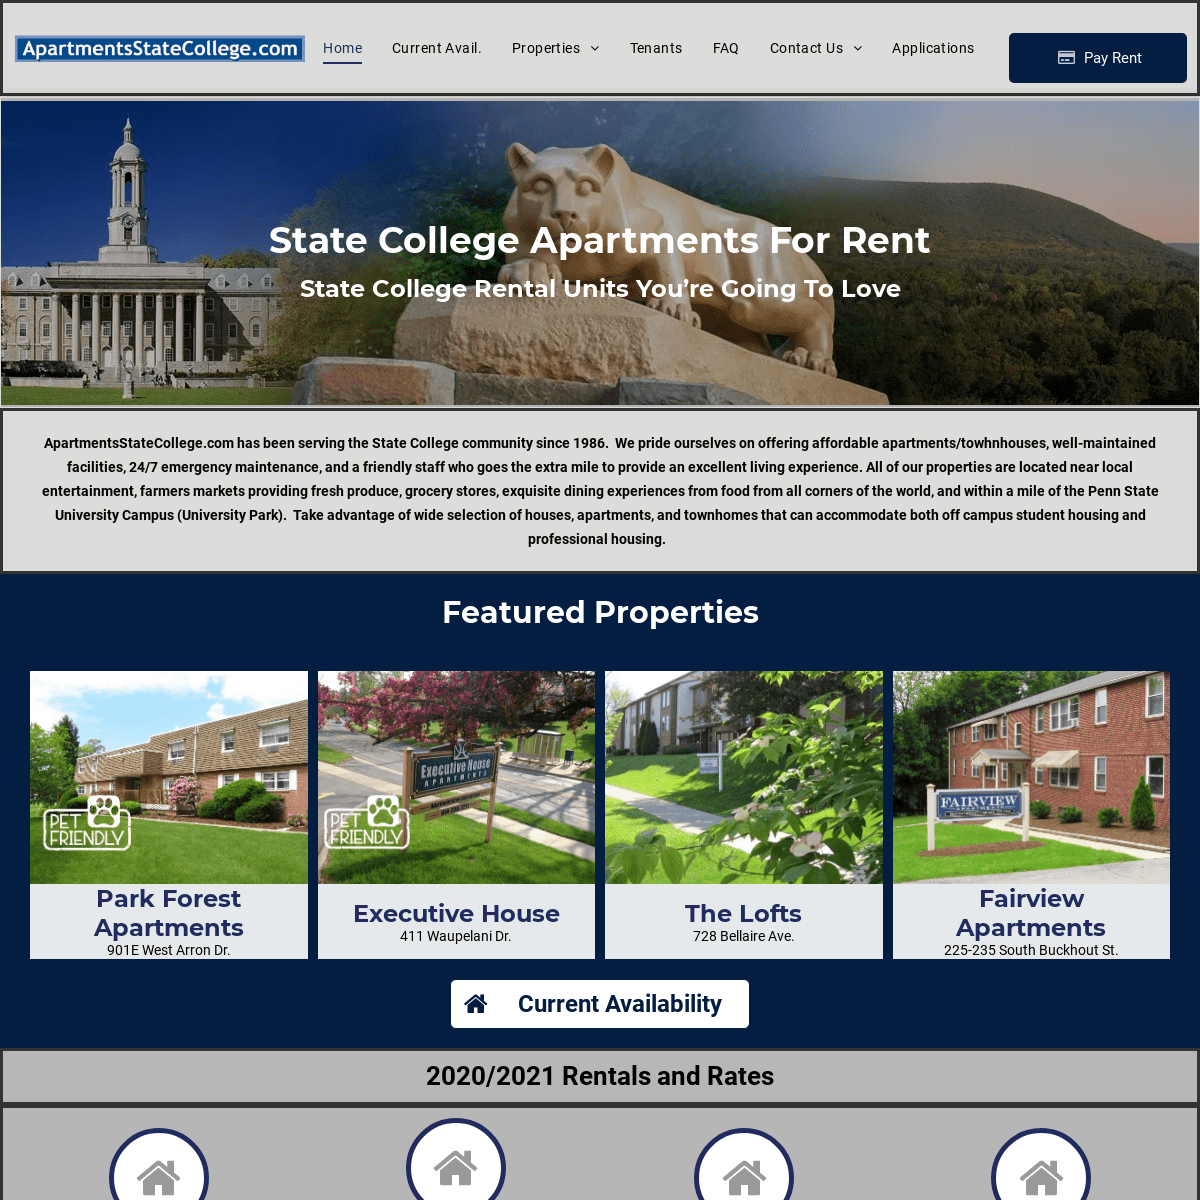 A complete backup of apartmentsstatecollege.com